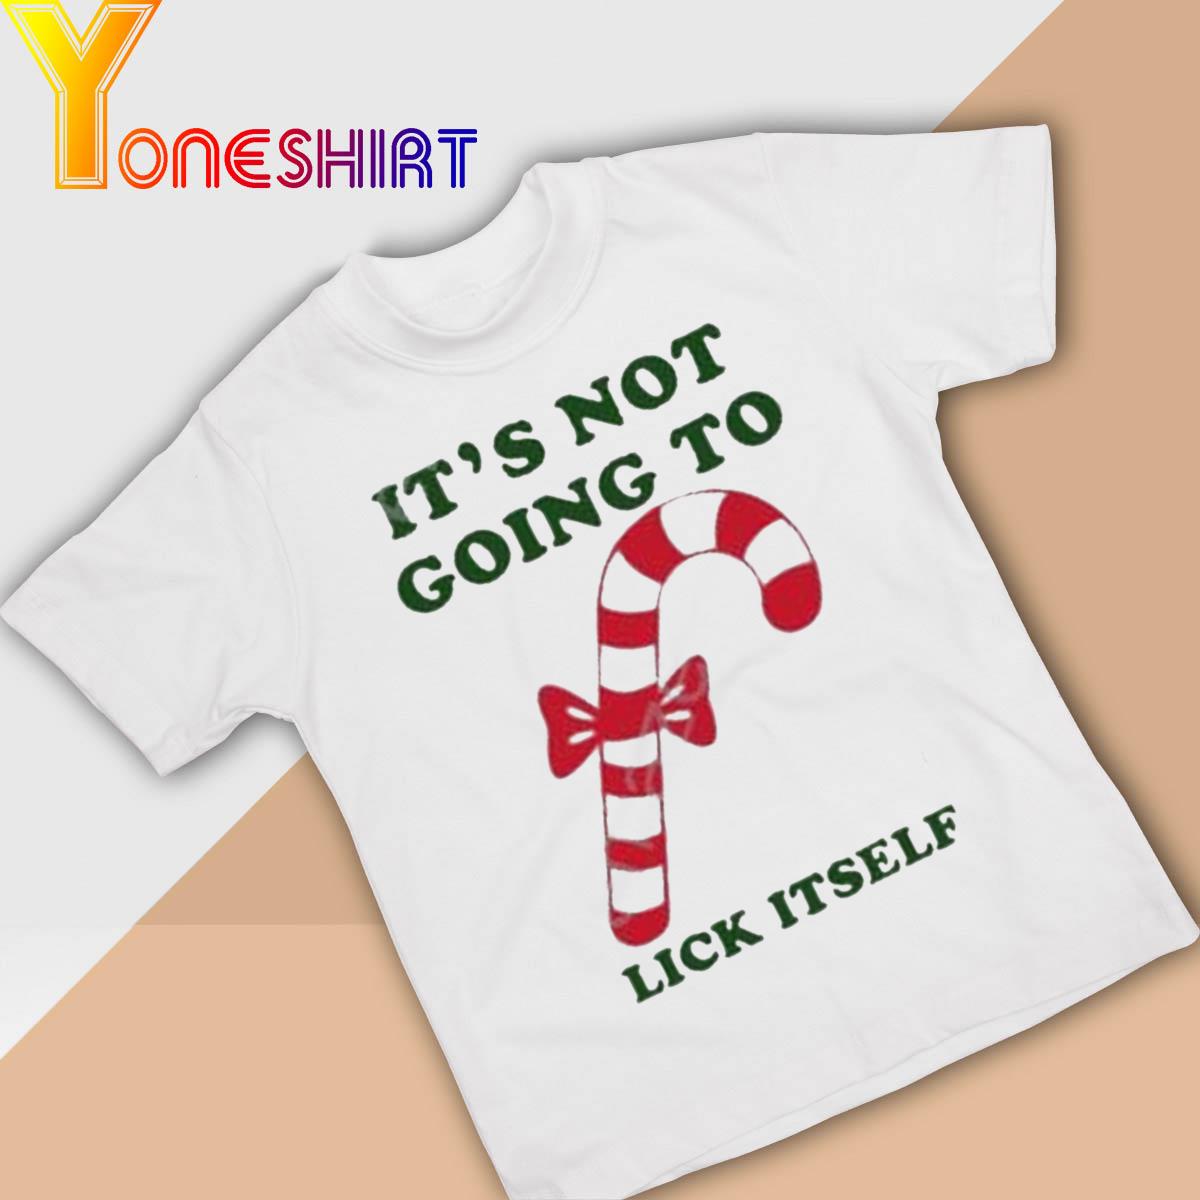 it’s Not Going To Lick Itself shirt